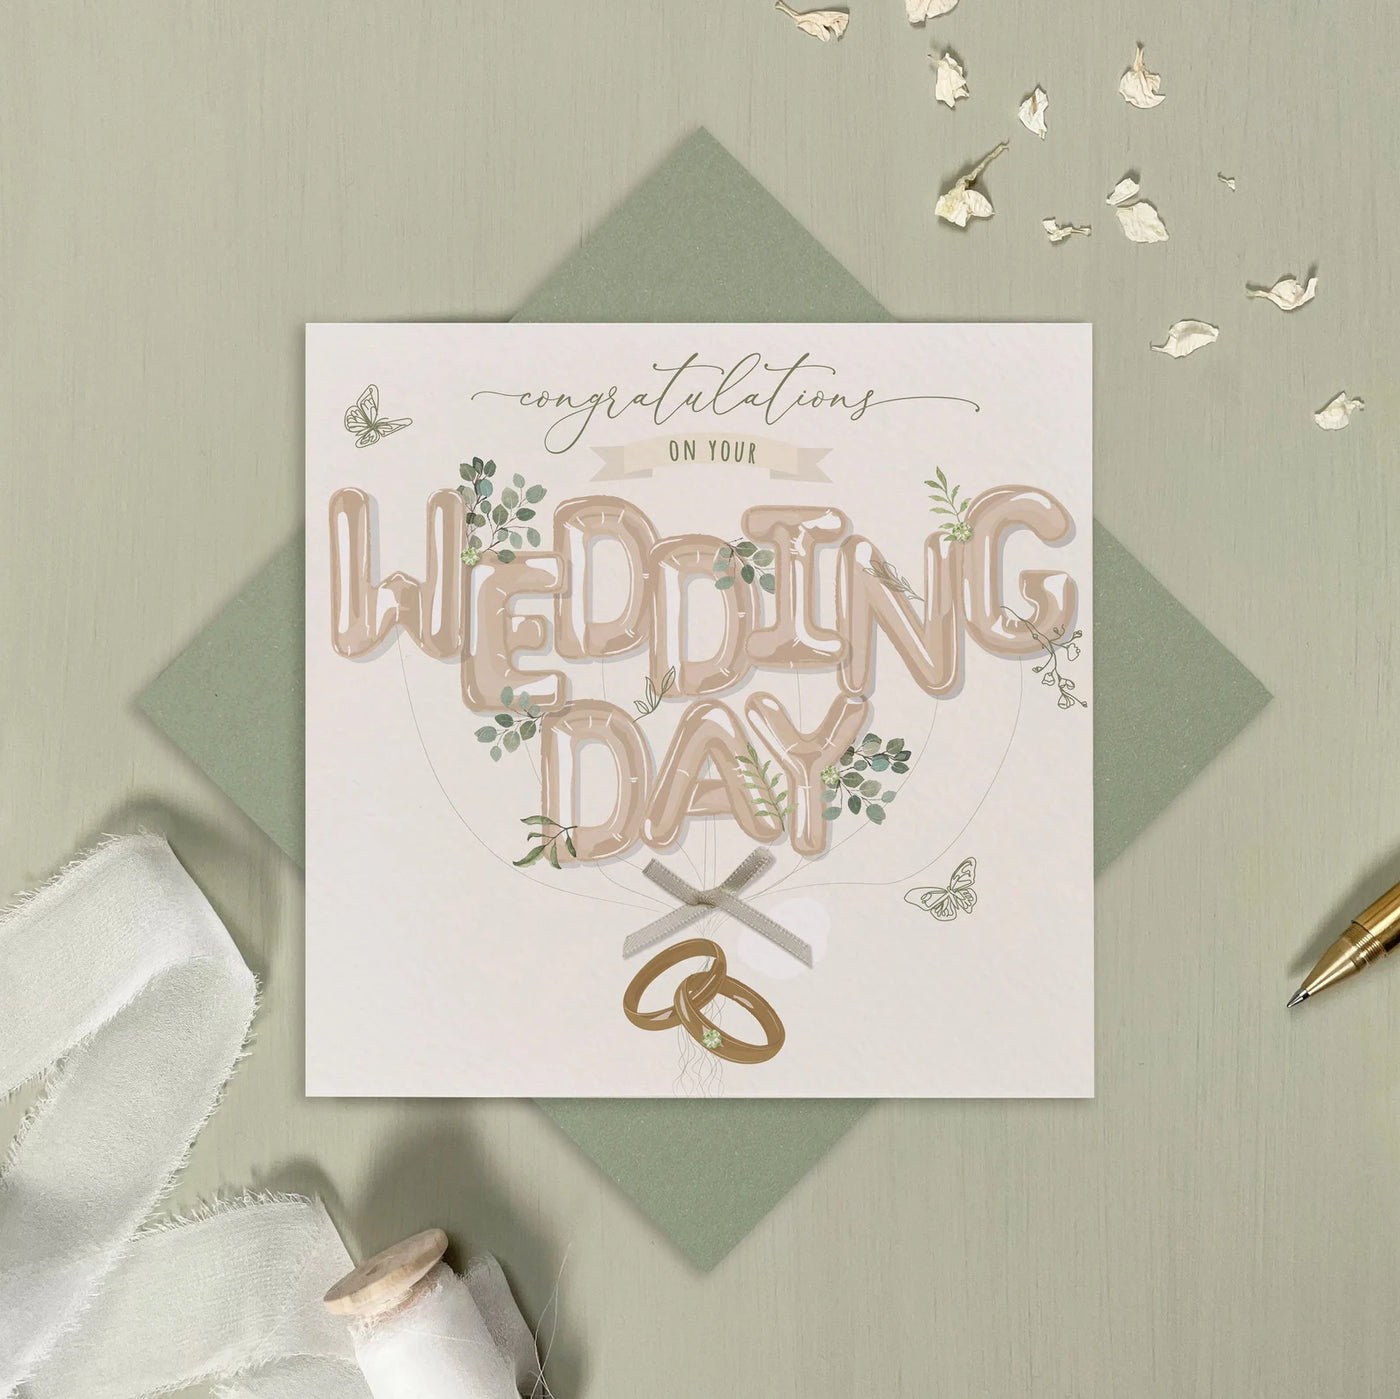 Congratulations on Your Wedding Day Balloons & Rings Card